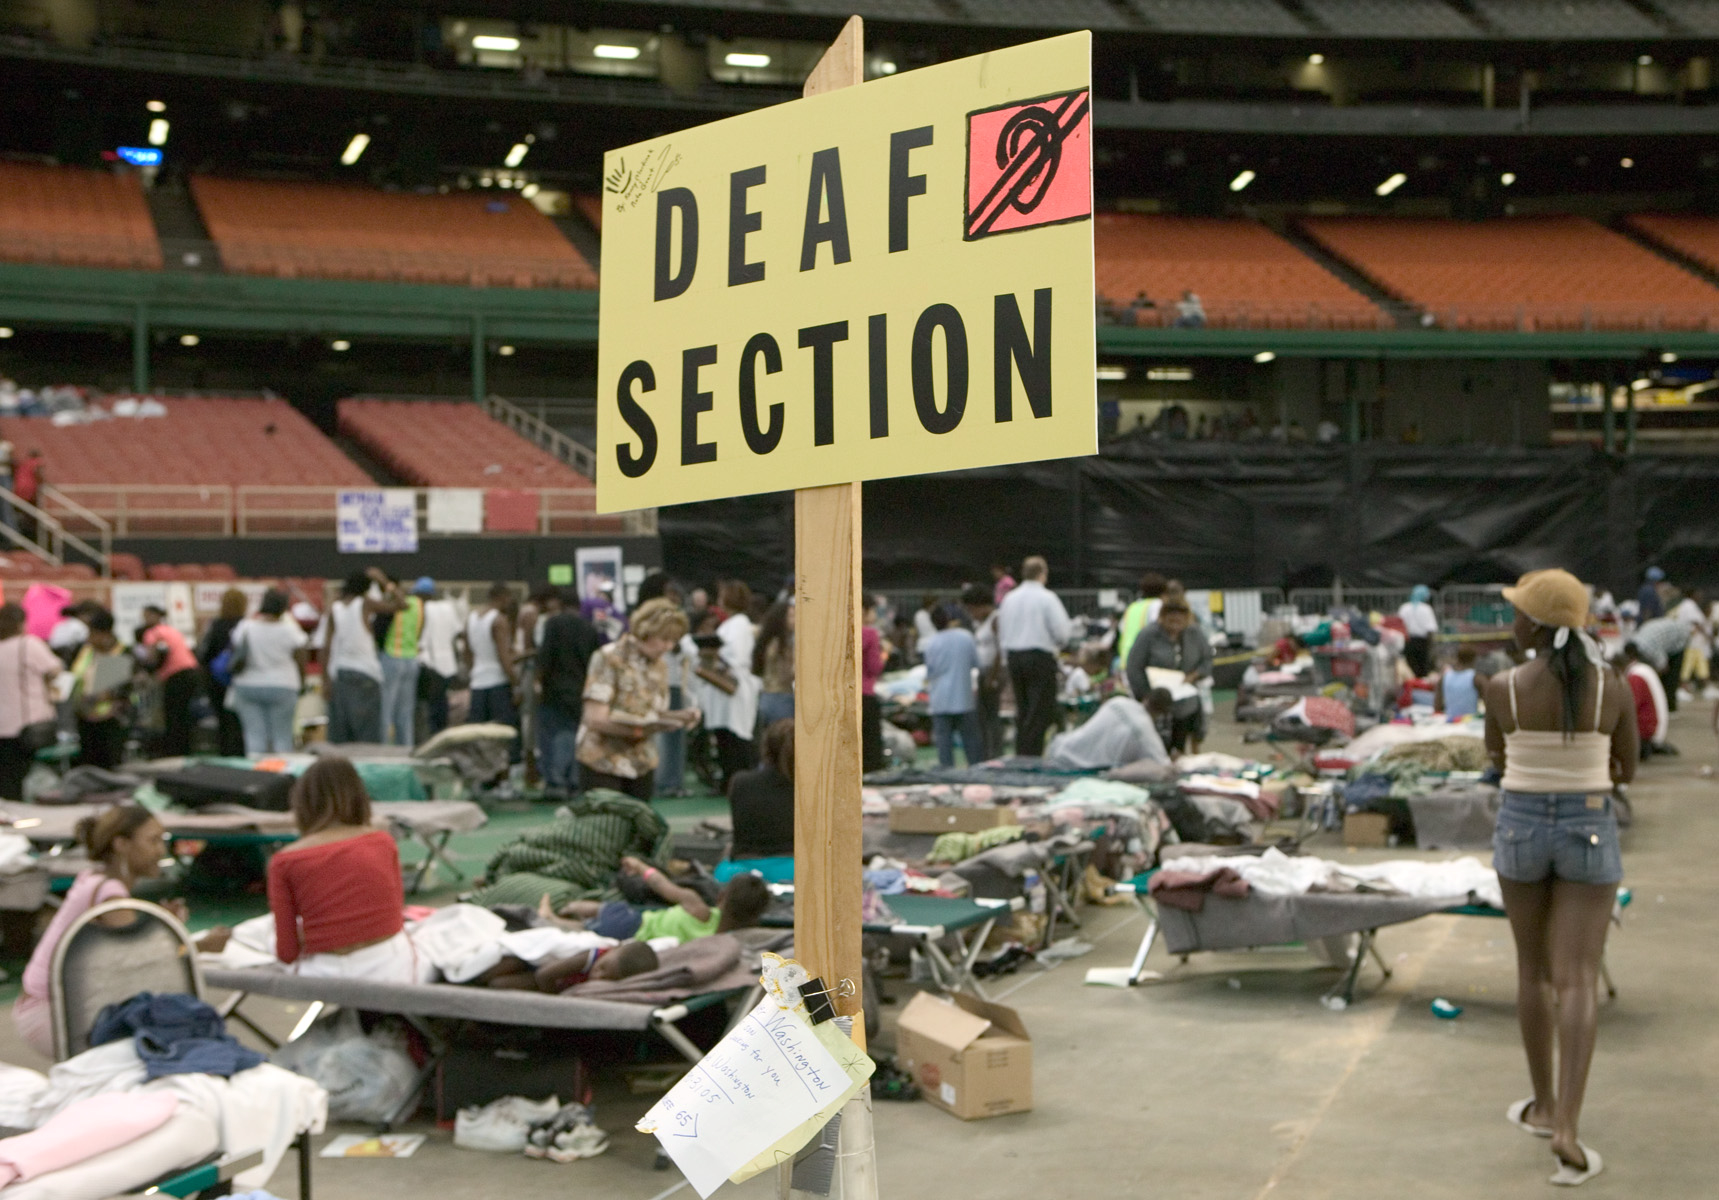 Photo of the deaf section for Hurricane Katrina evacuees at the Houston Astrodome.